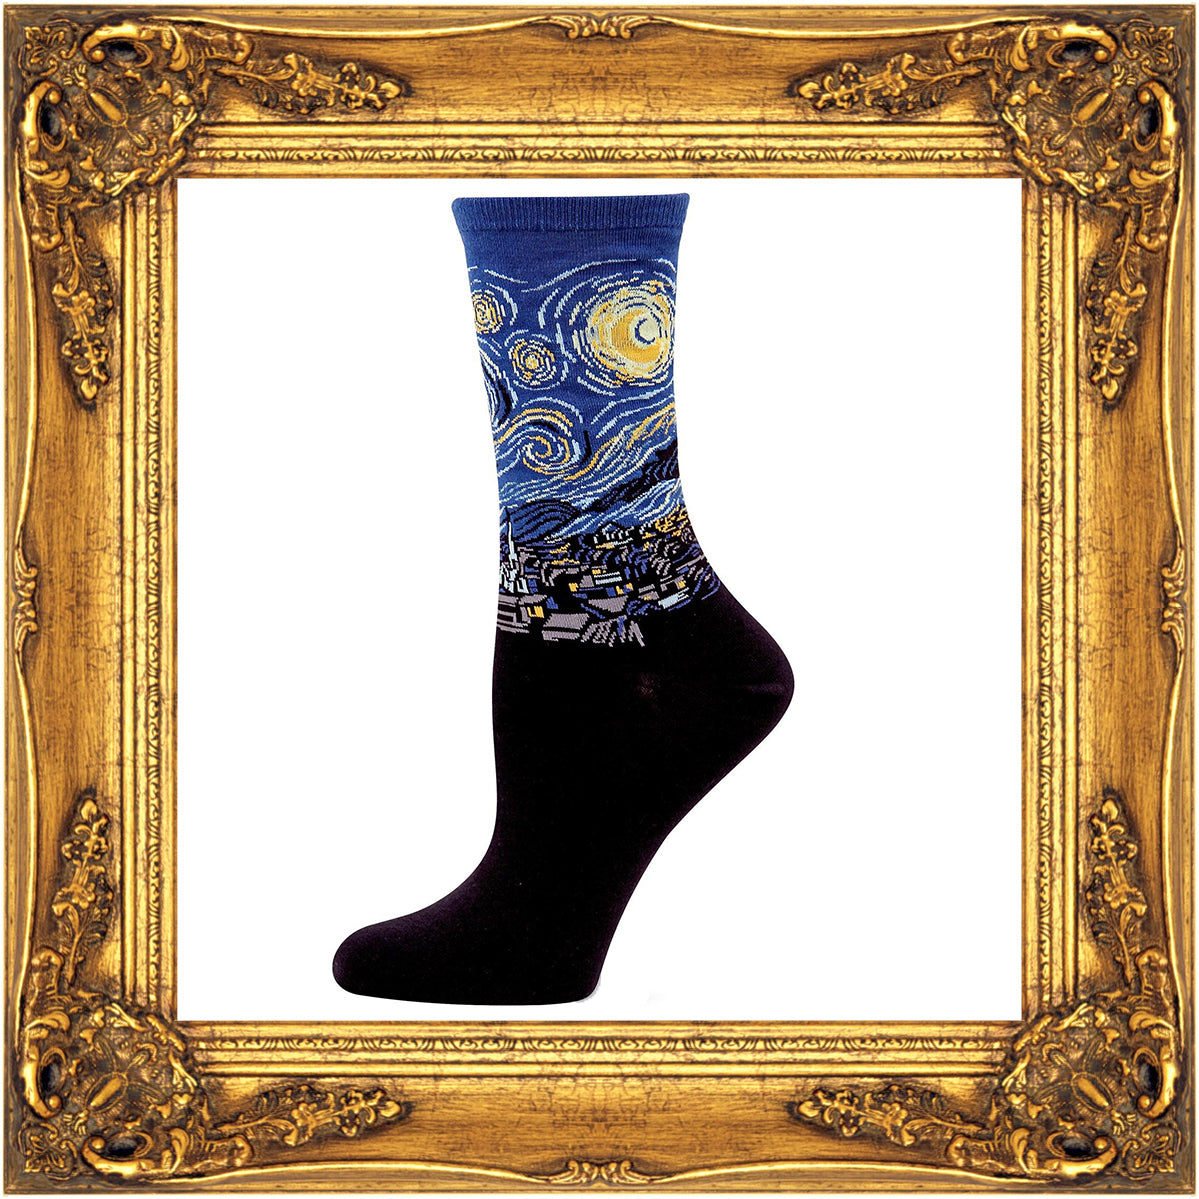 Art Socks with famous paintings like Starry Night by van Gogh turn your feet into an art gallery!